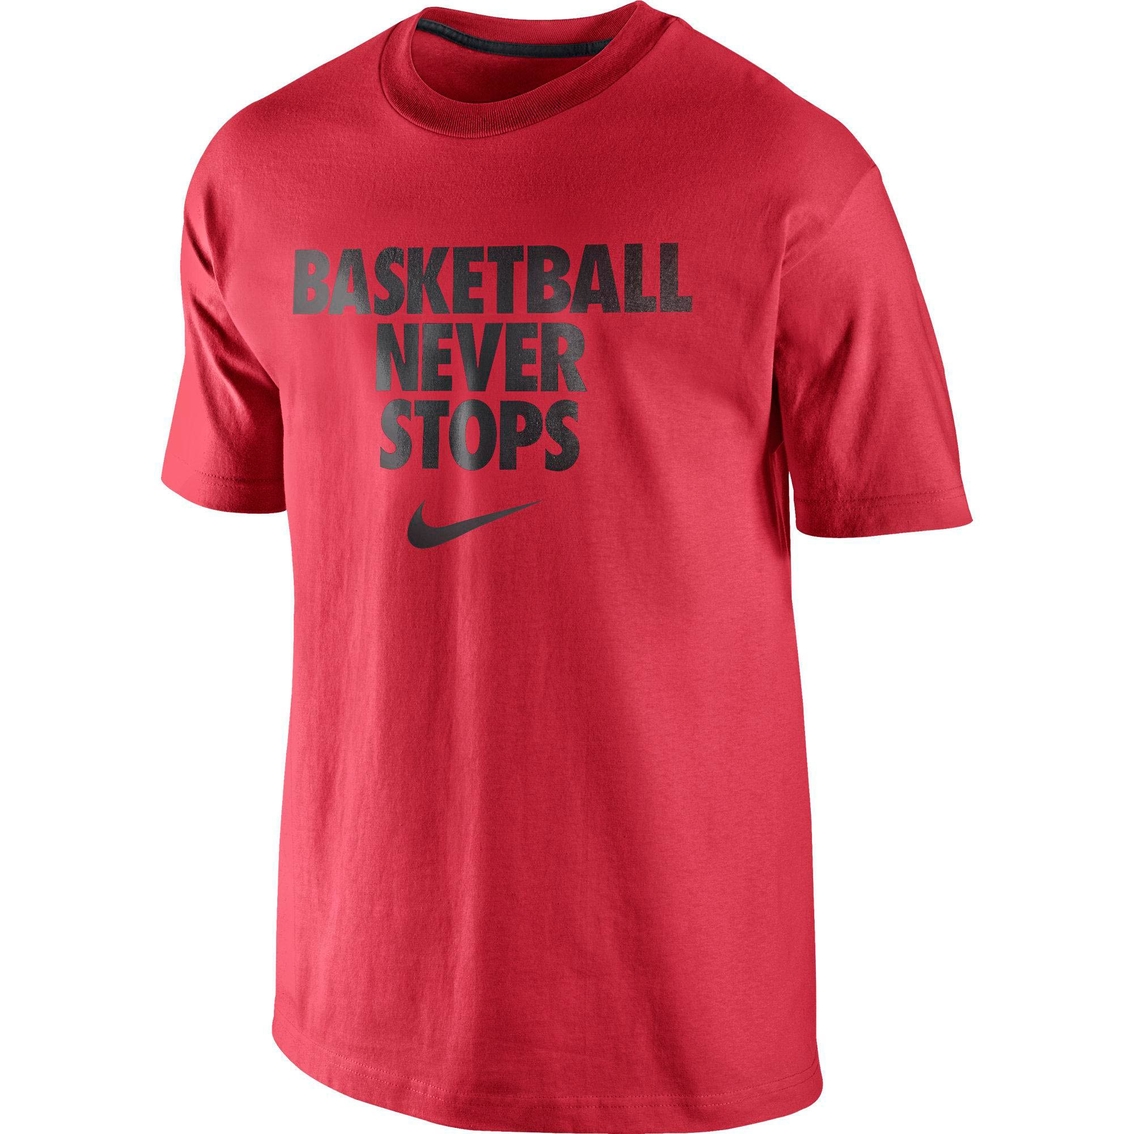 Nike Basketball Never Stops Tee | Shirts | Clothing & Accessories ...